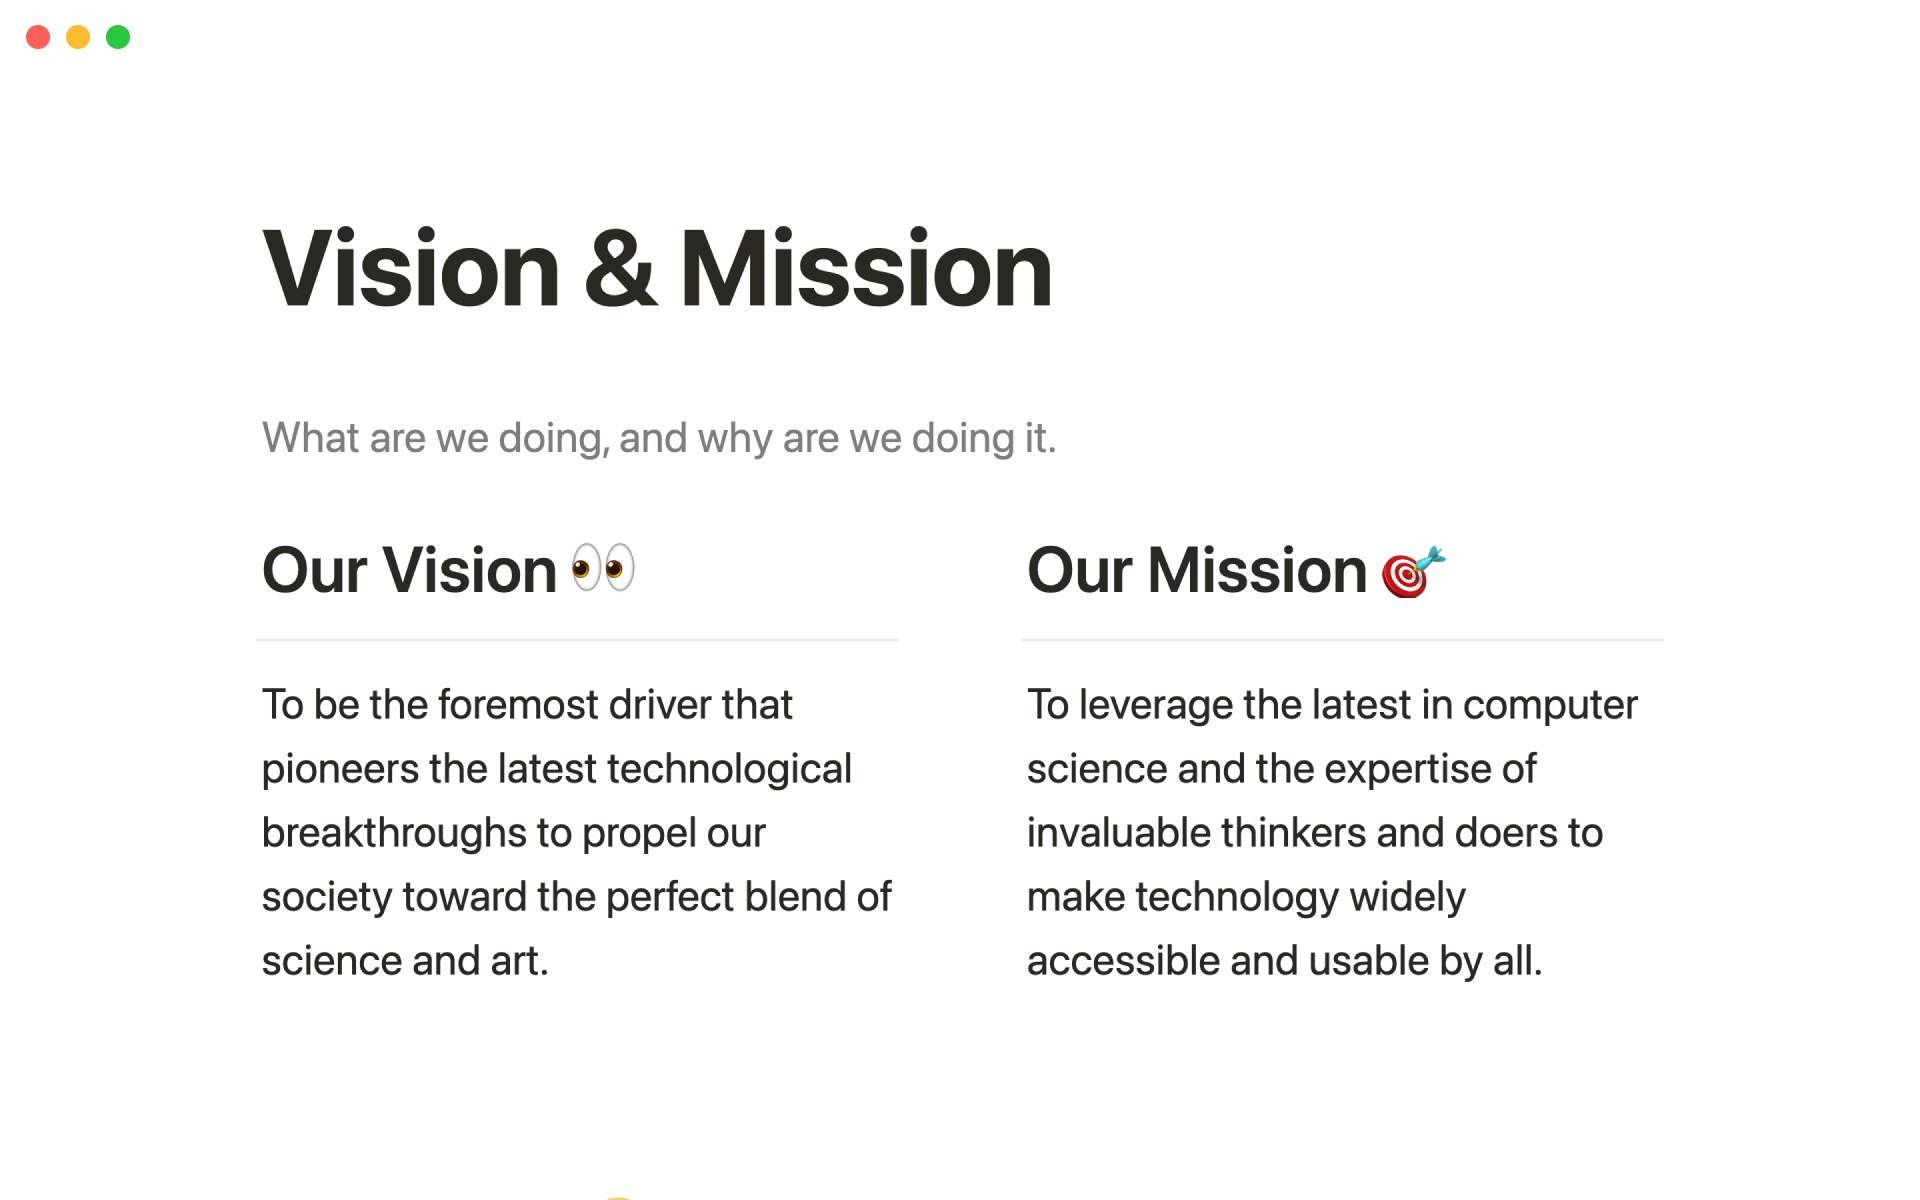 mission and vision statement